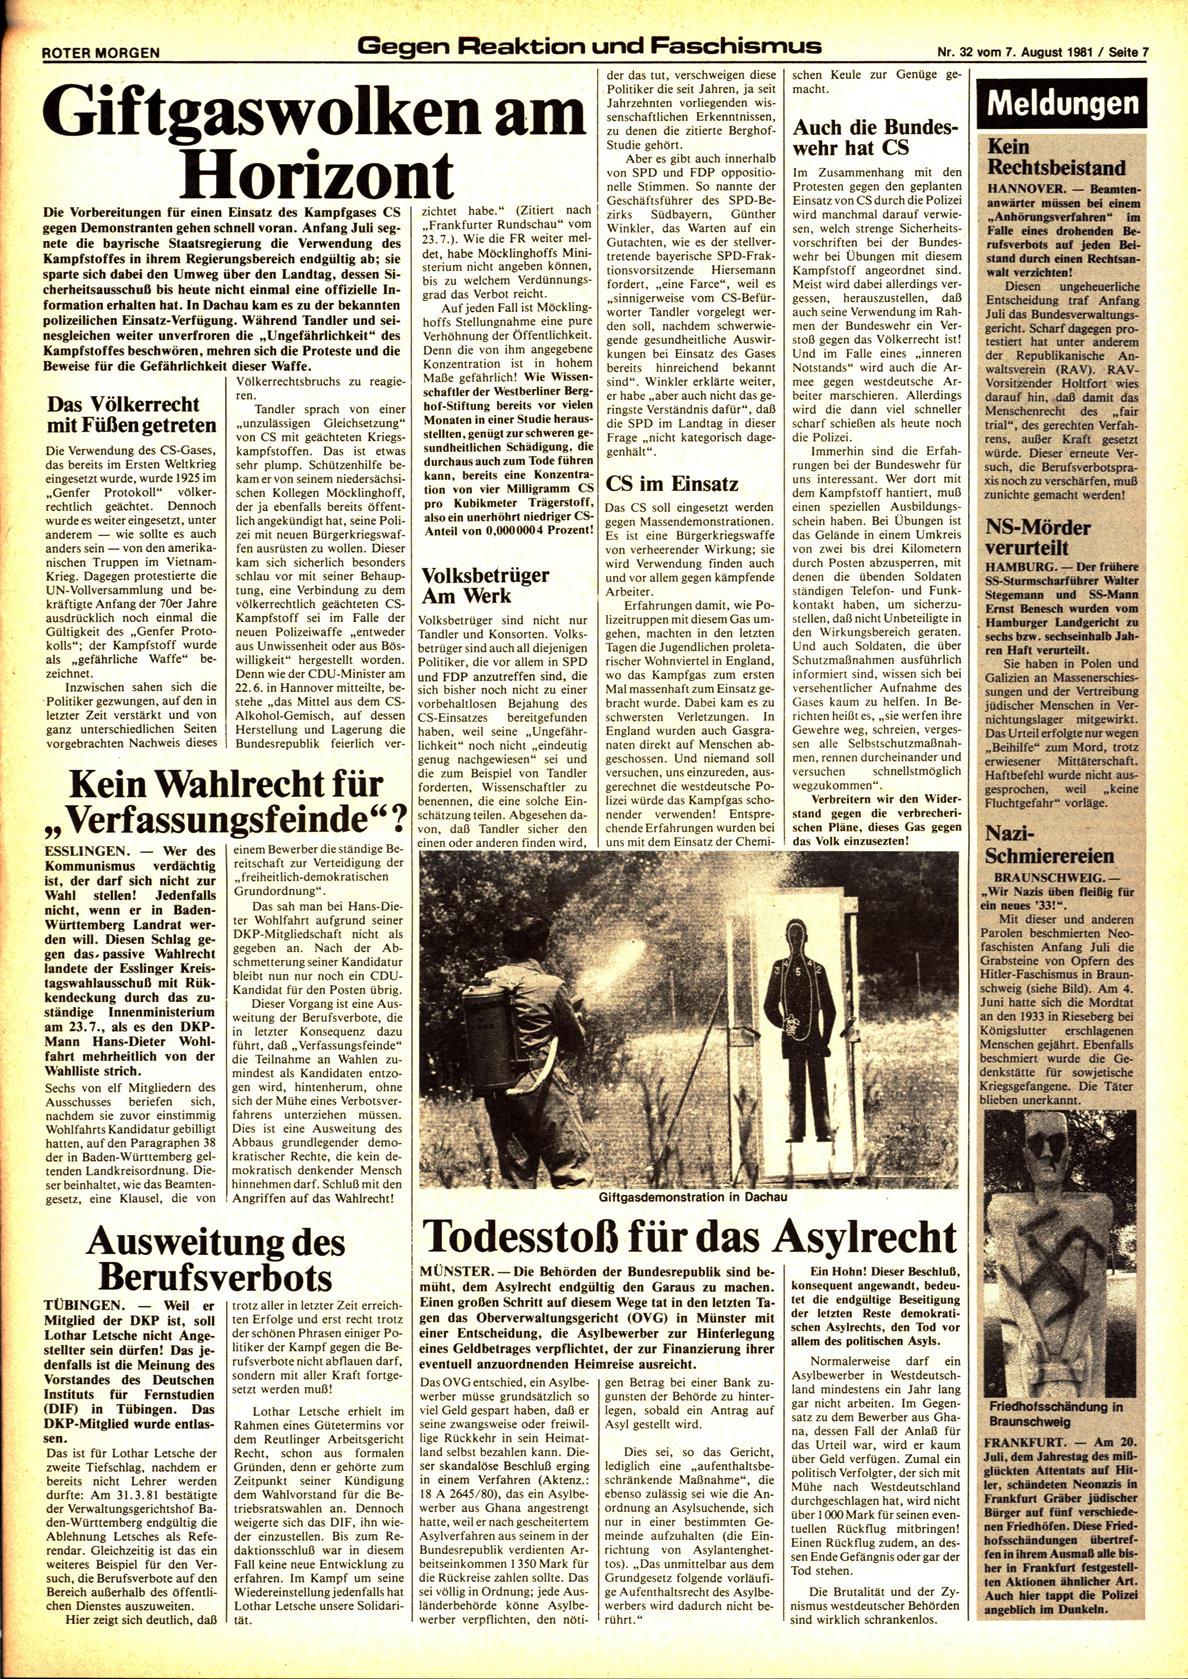 Roter Morgen, 15. Jg., 7. August 1981, Nr. 32, Seite 7